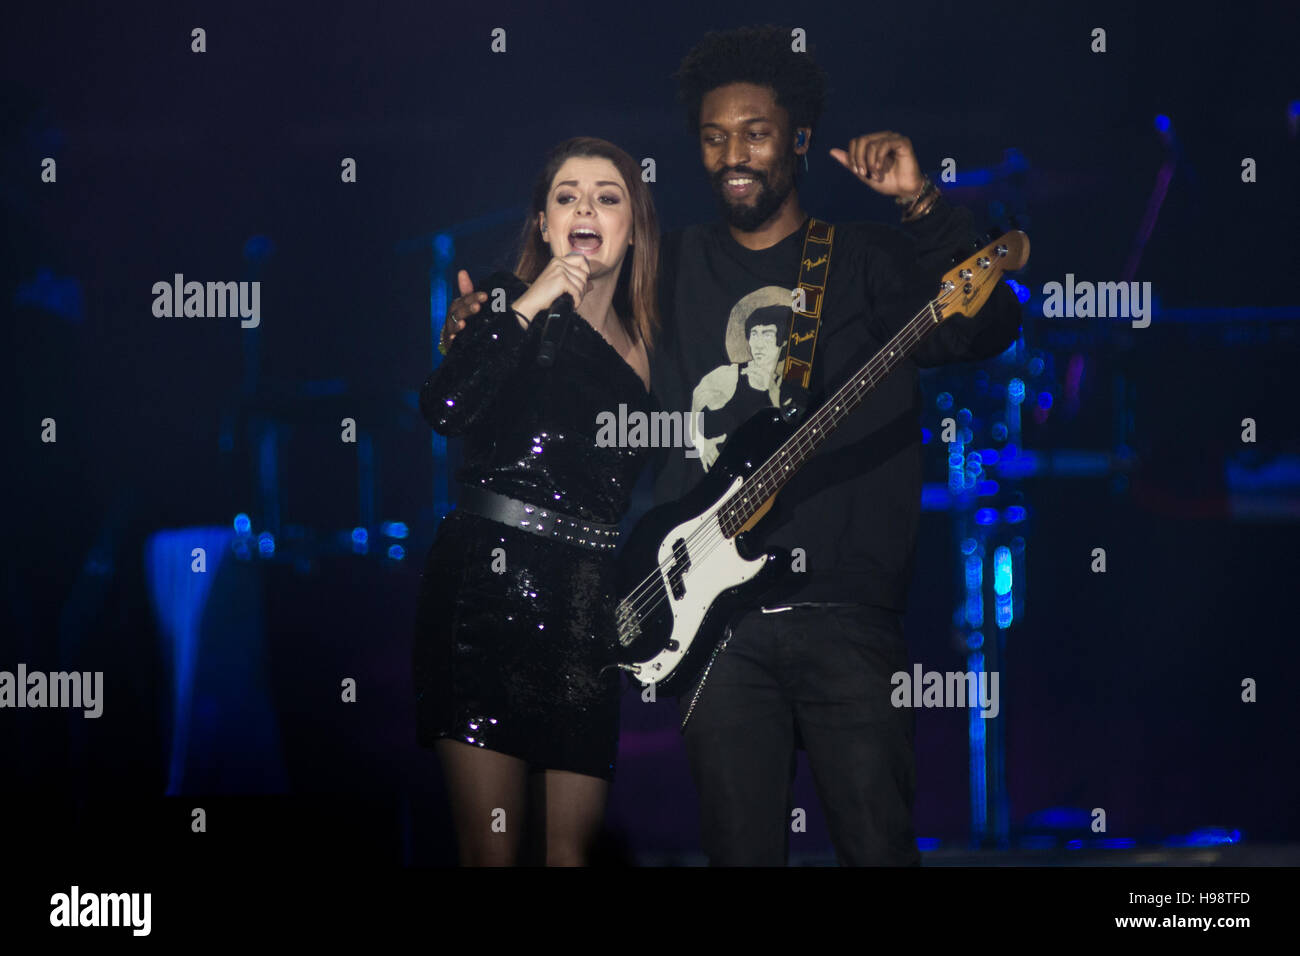 Bologna, Italy. 19th November 2016. The American electronic duo The Knocks with special guest Italian pop singer Annalisa performs live on stage at Unipol Arena opening the show of Justin Bieber Credit:  Rodolfo Sassano/Alamy Live News Stock Photo